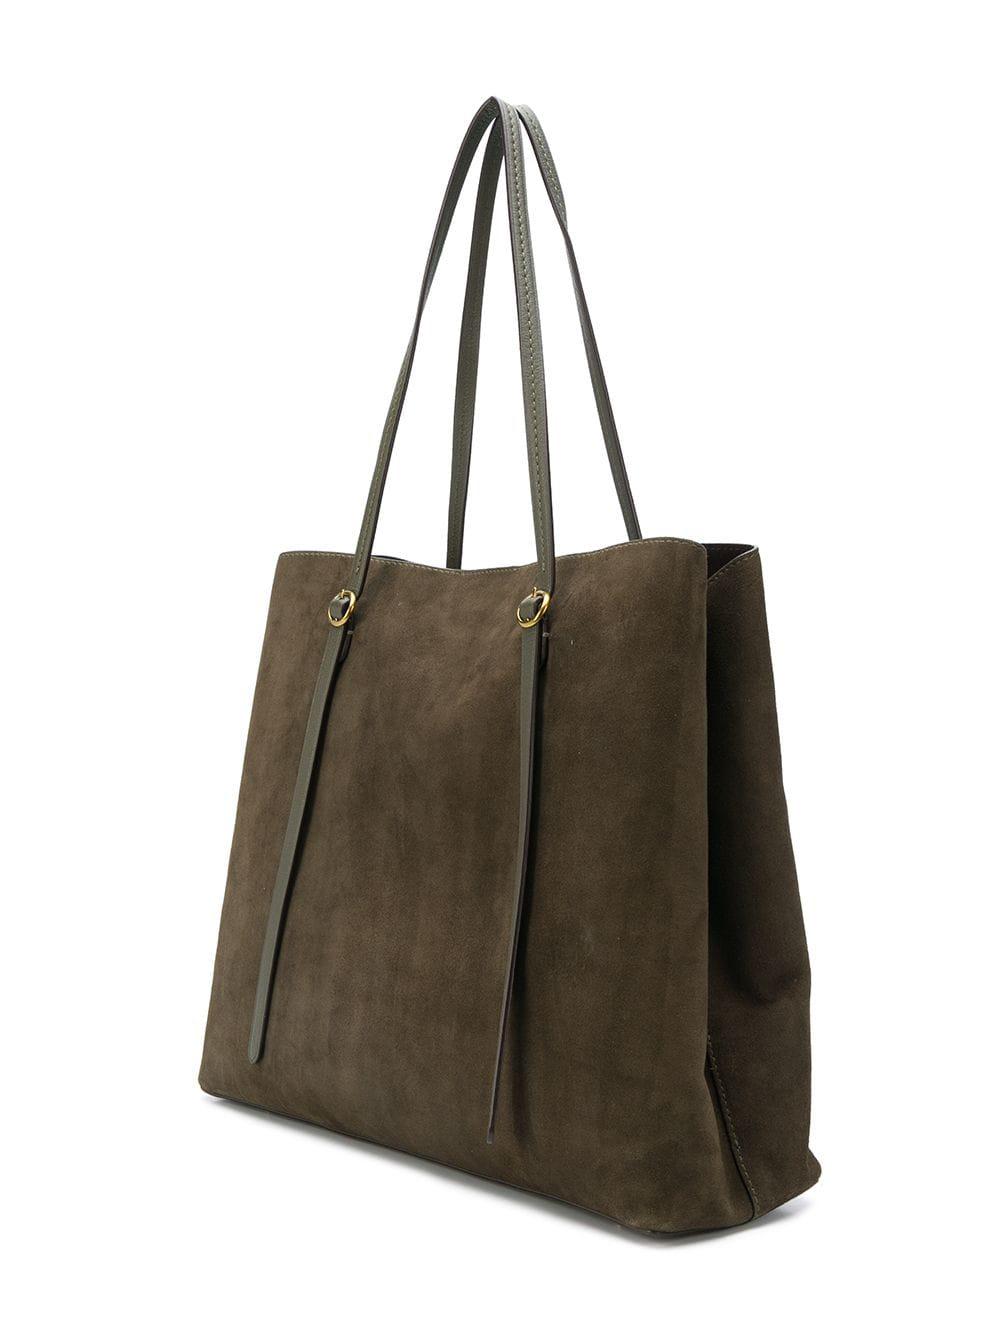 Polo Ralph Lauren Leather Lennox Tote Large Olive in Green - Lyst